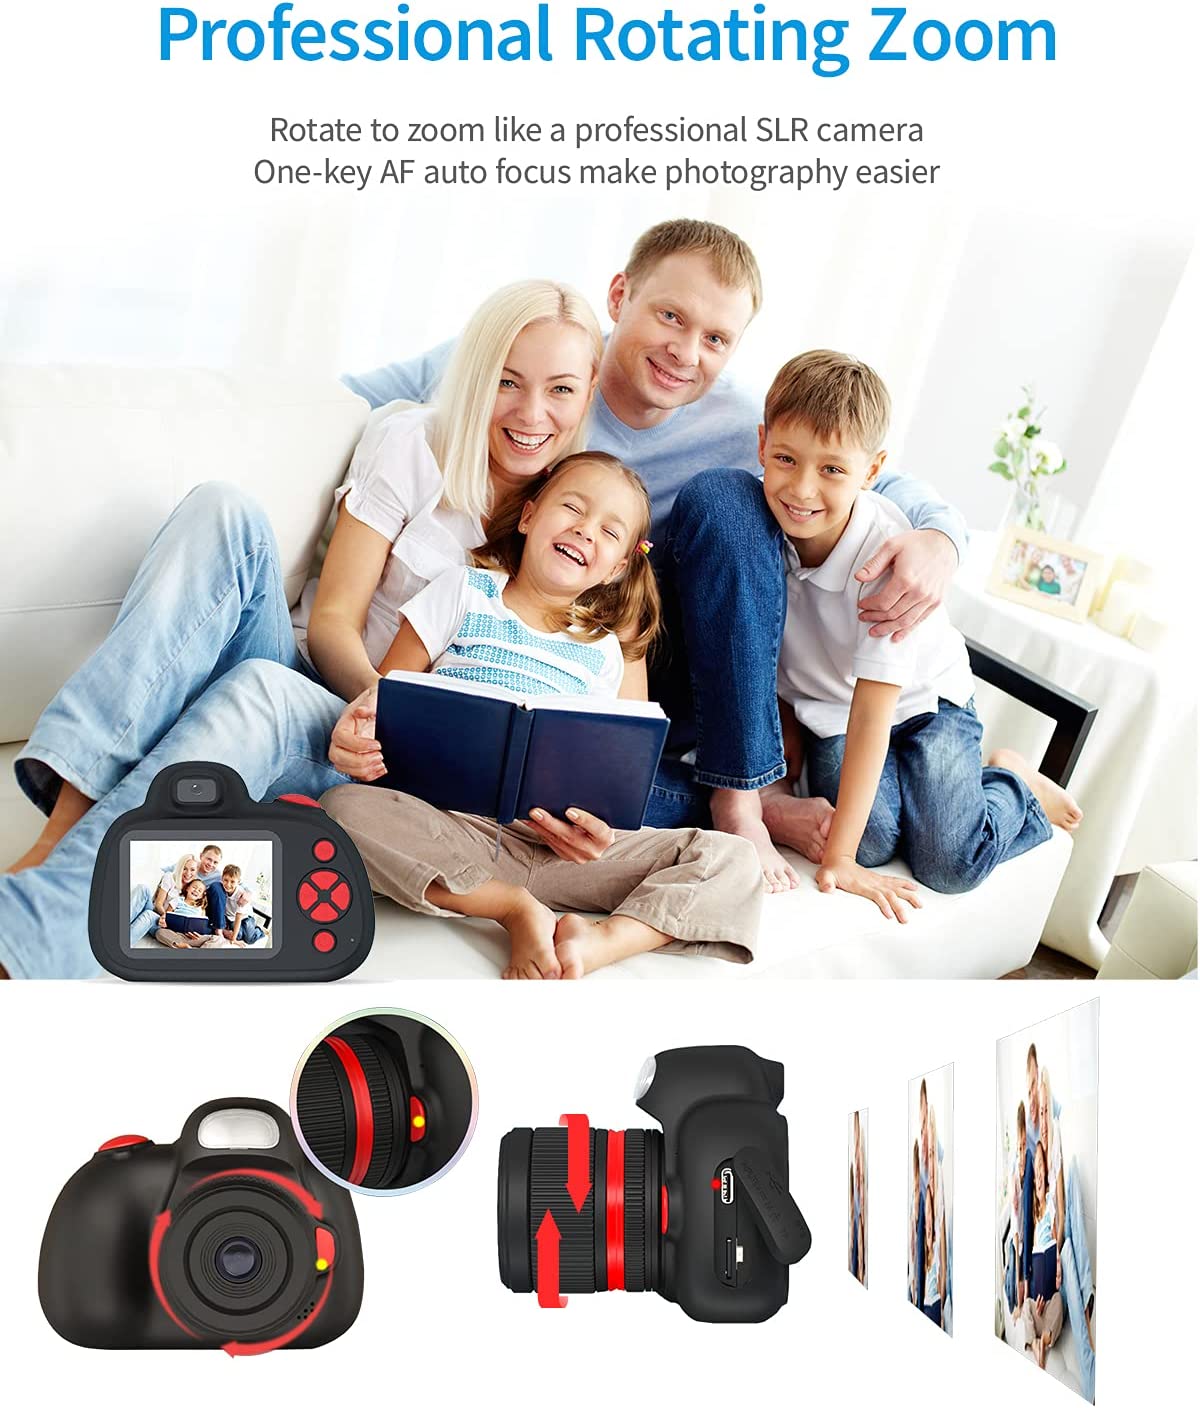 Kids Camera,Digital Camera for Kids 3-8 Year Old,Birthday, Toys for Girls Boys,2.4 inch IPS Screen,Video Camcorder with Flash,32G SD Card Included